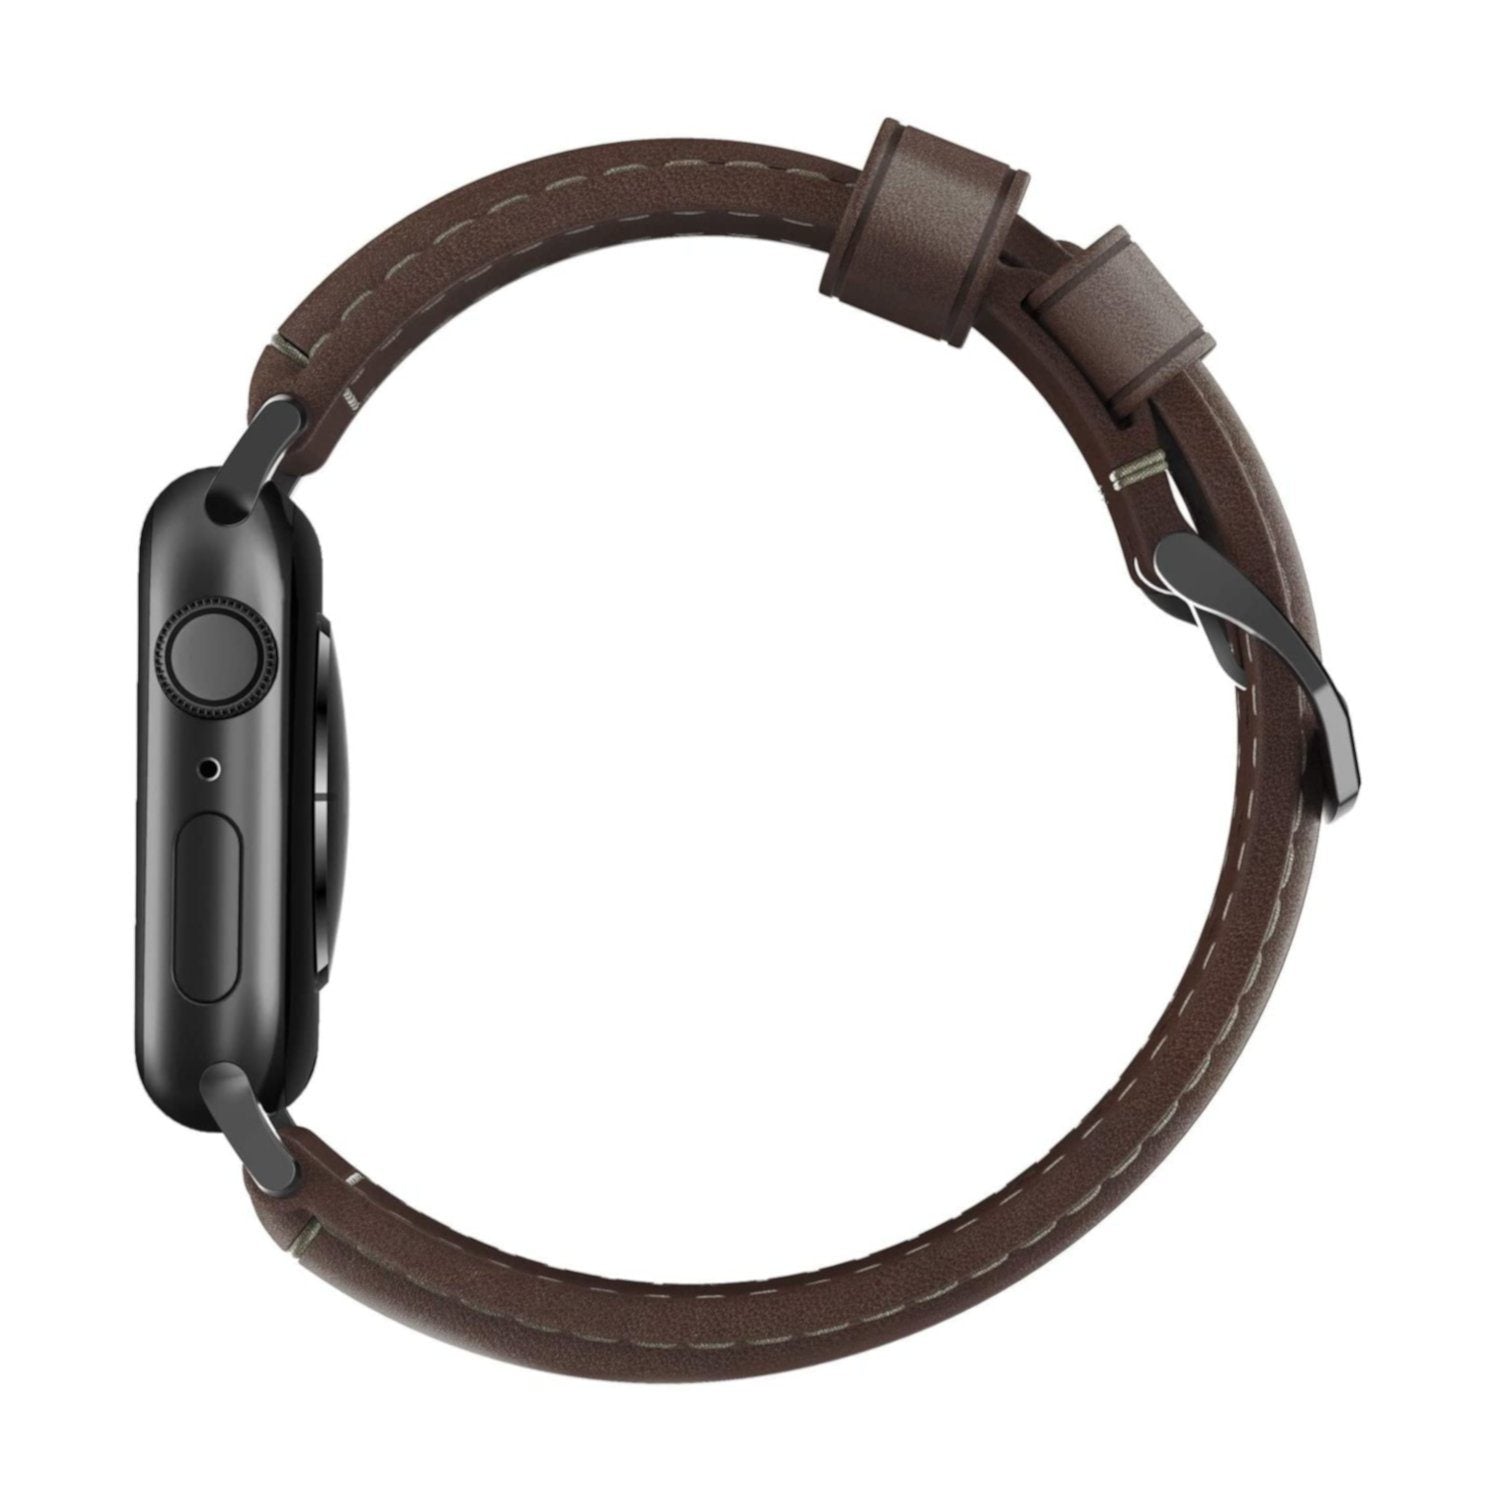 NOMAD Classic Strap Rustic Brown Horween Leather for Apple Watch 44mm/42mm, Silver Hardware Apple Watch Strap NOMAD 